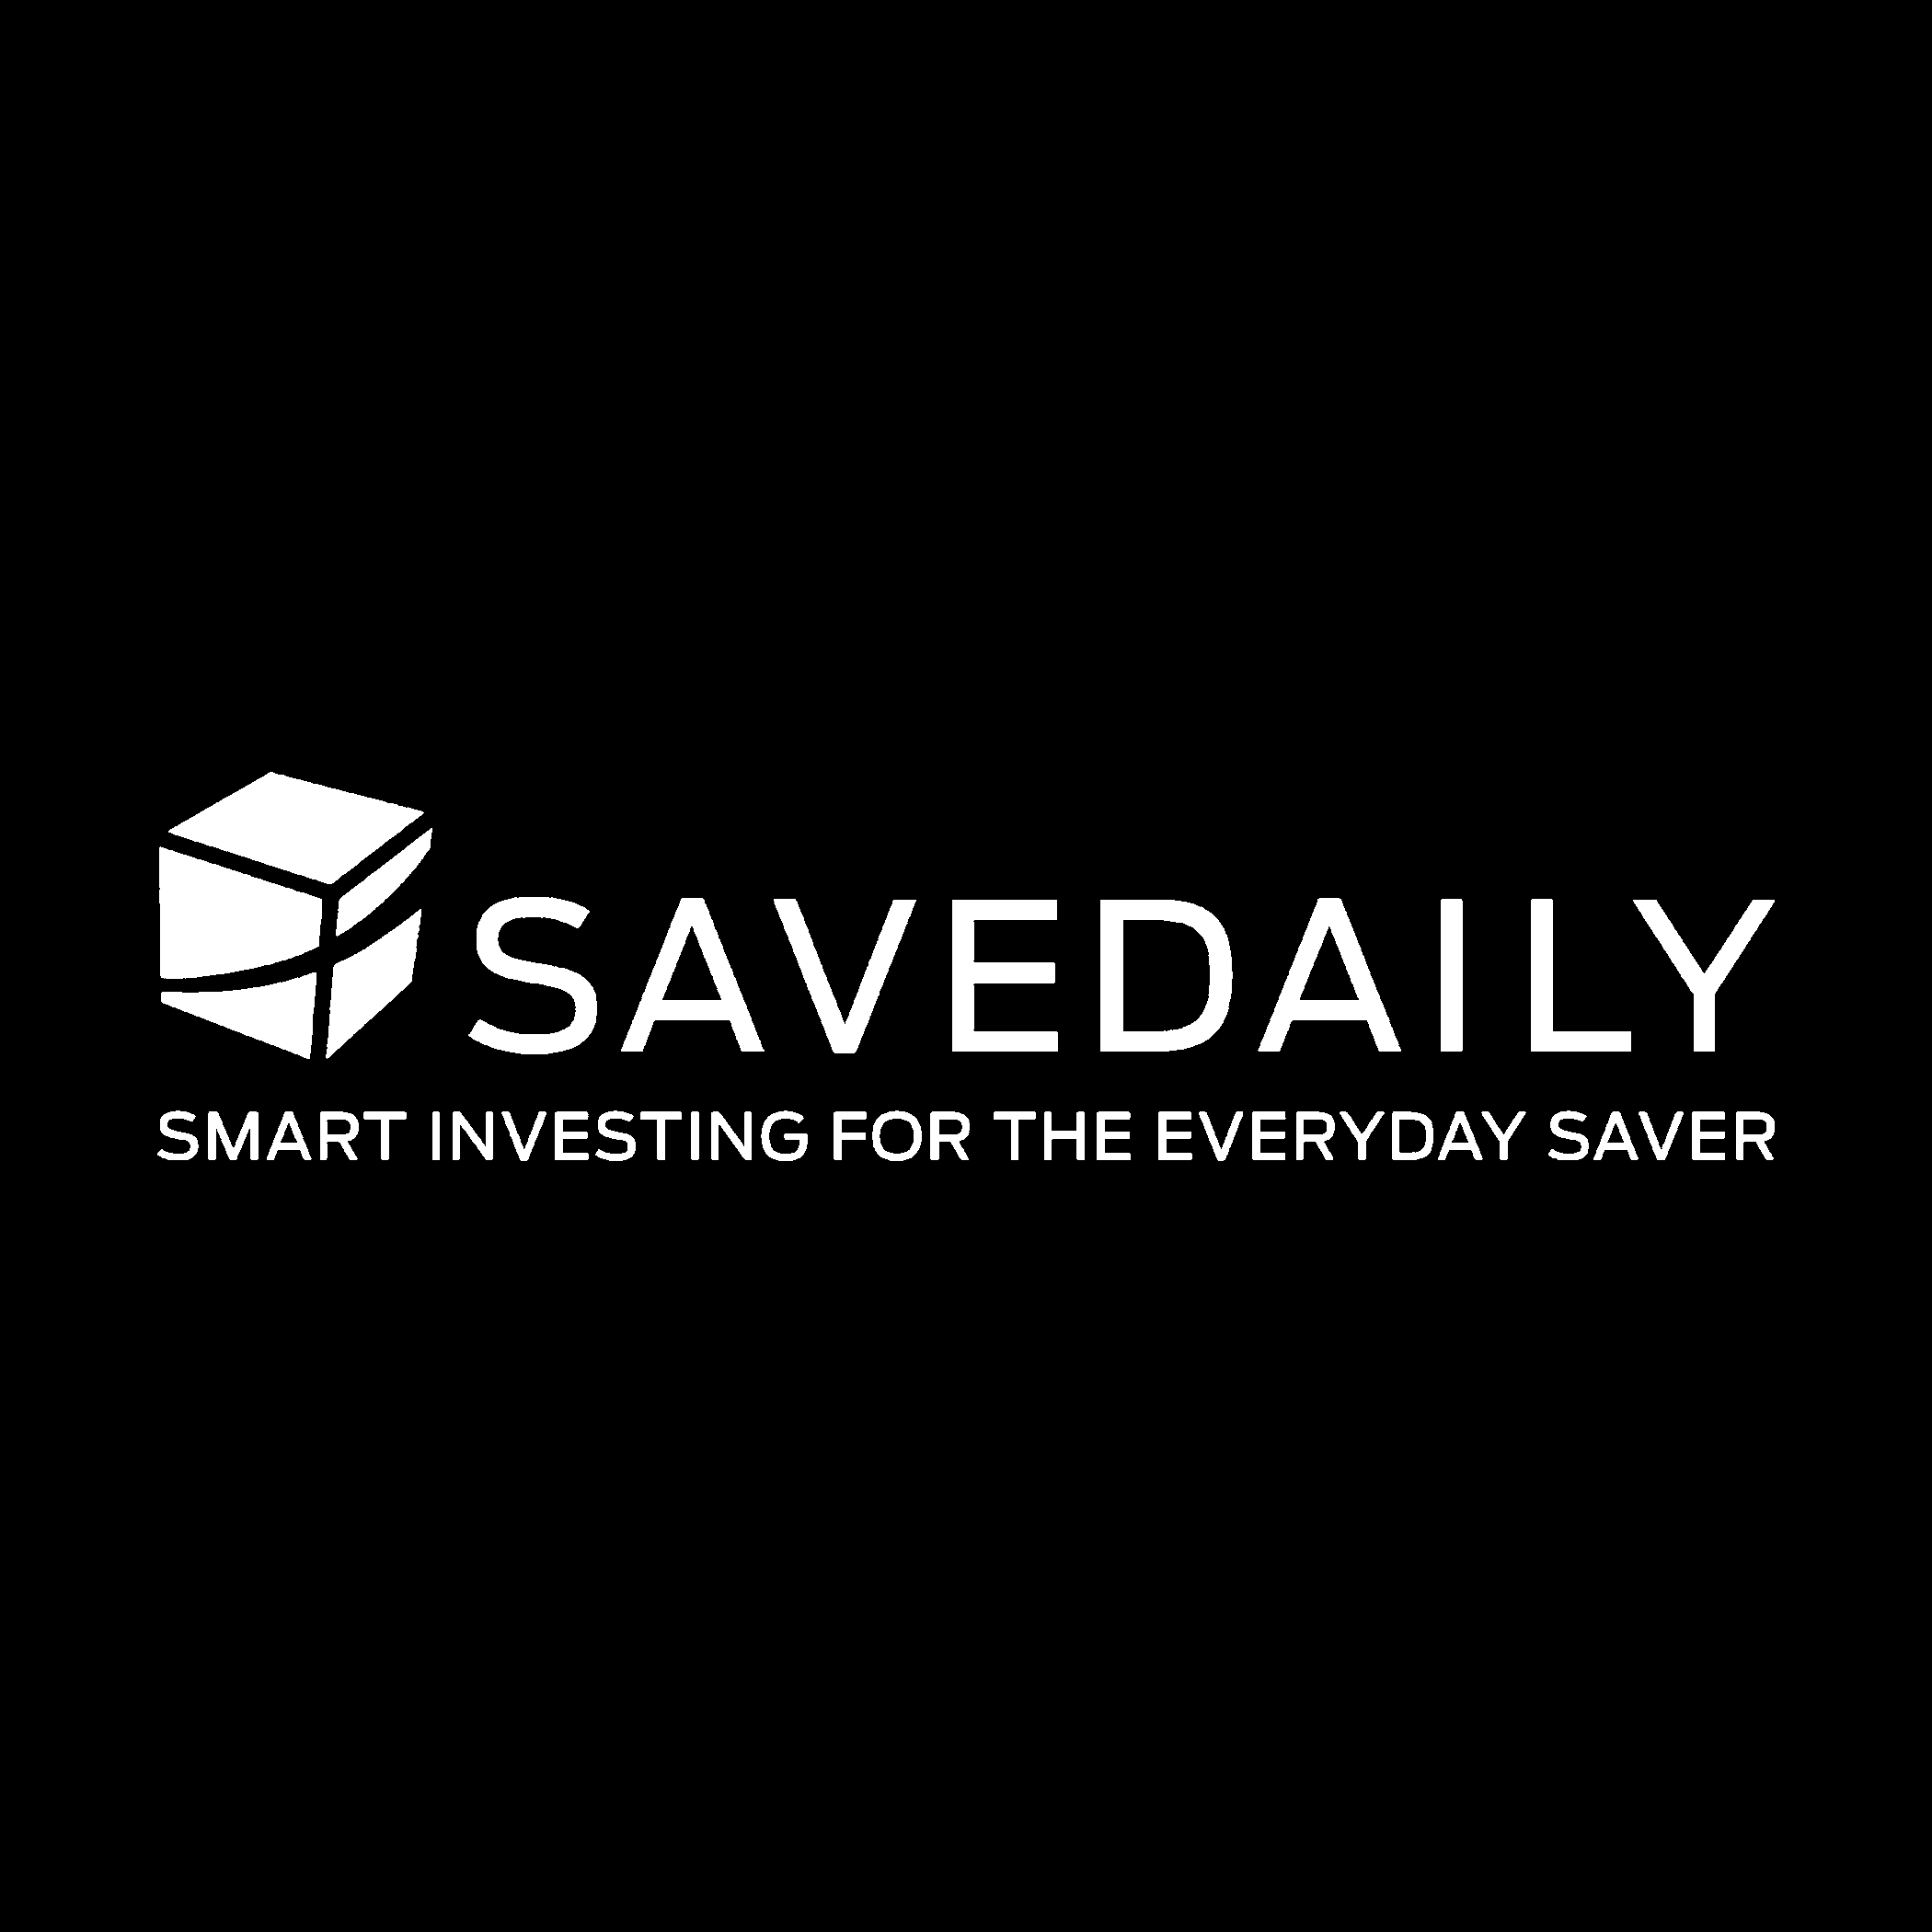 Savedaily-Done